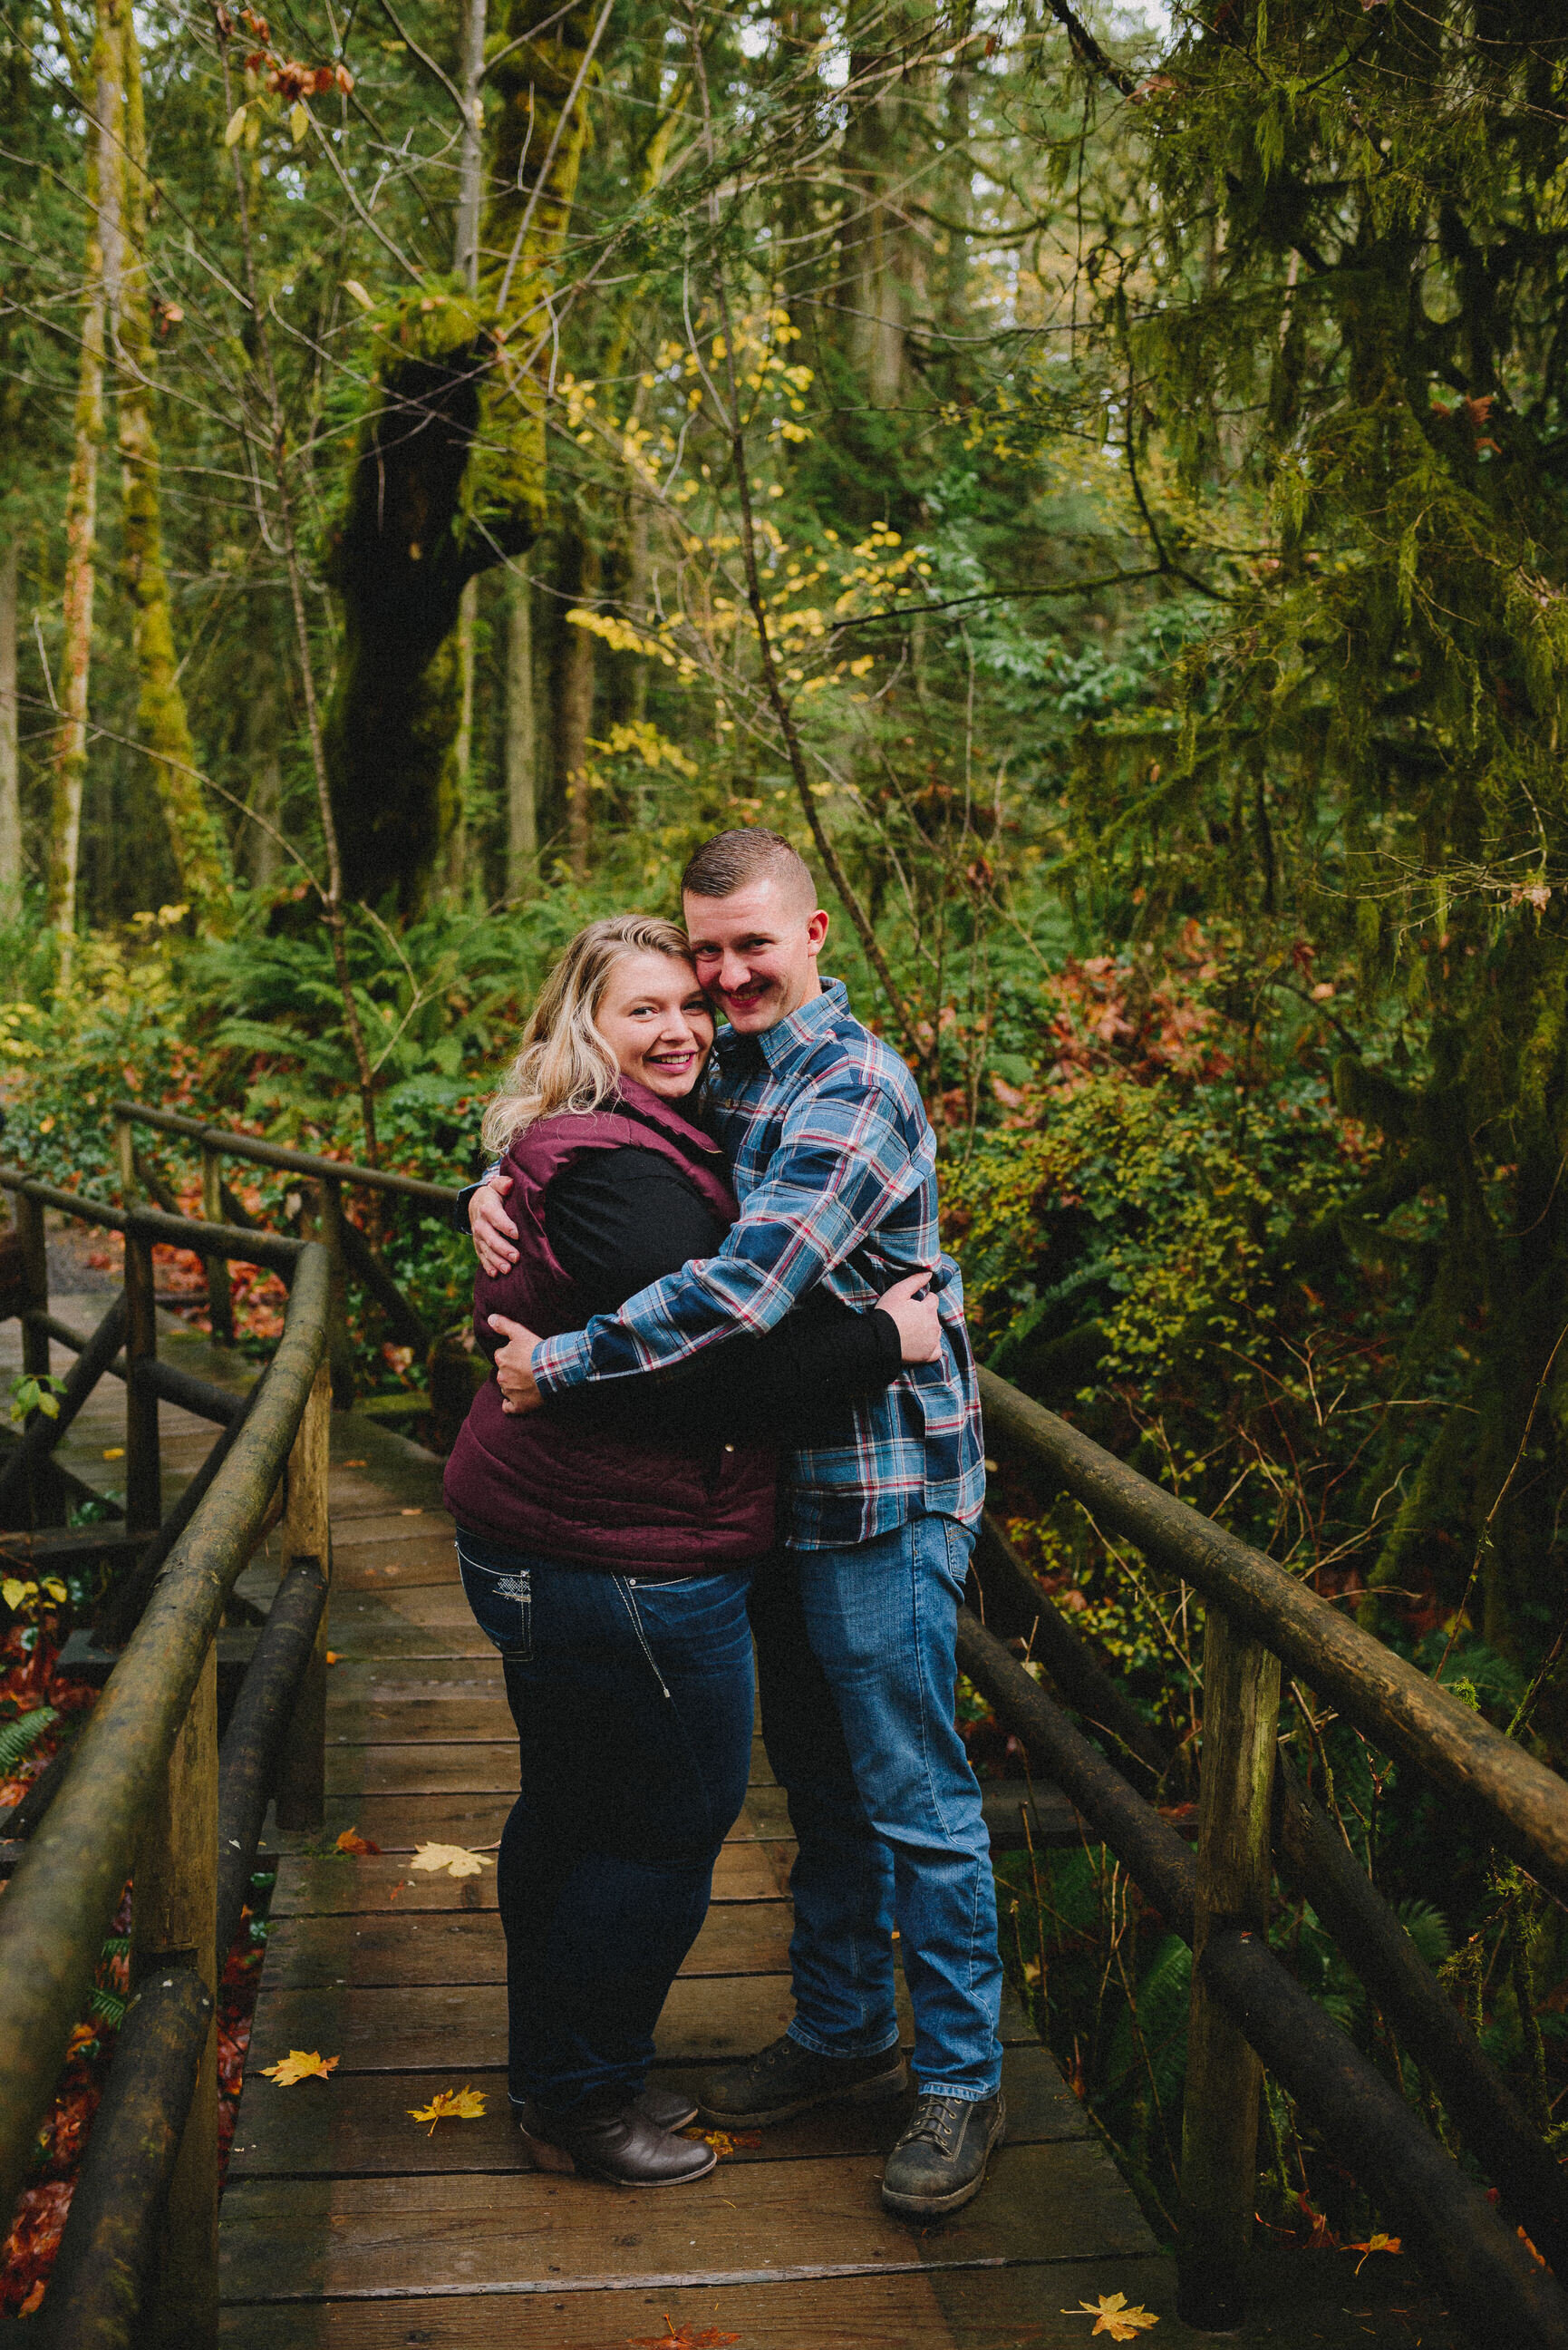 priest-point-park-couples-session-olympia-washington-way-up-north-photography (1).jpg